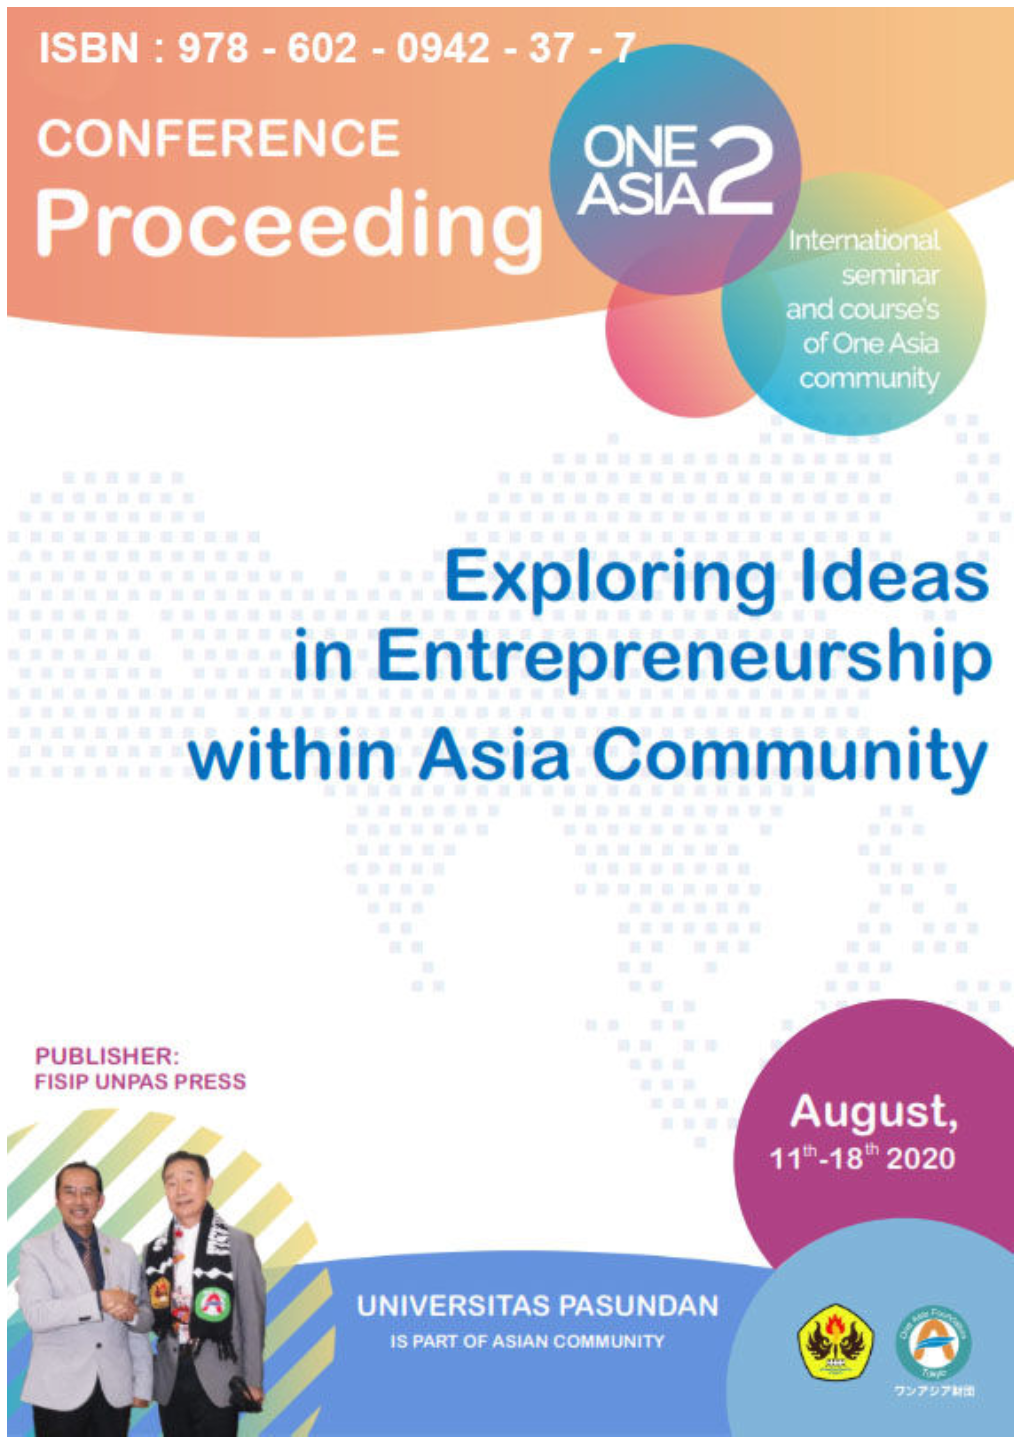 Conference Proceeding One Asia 2